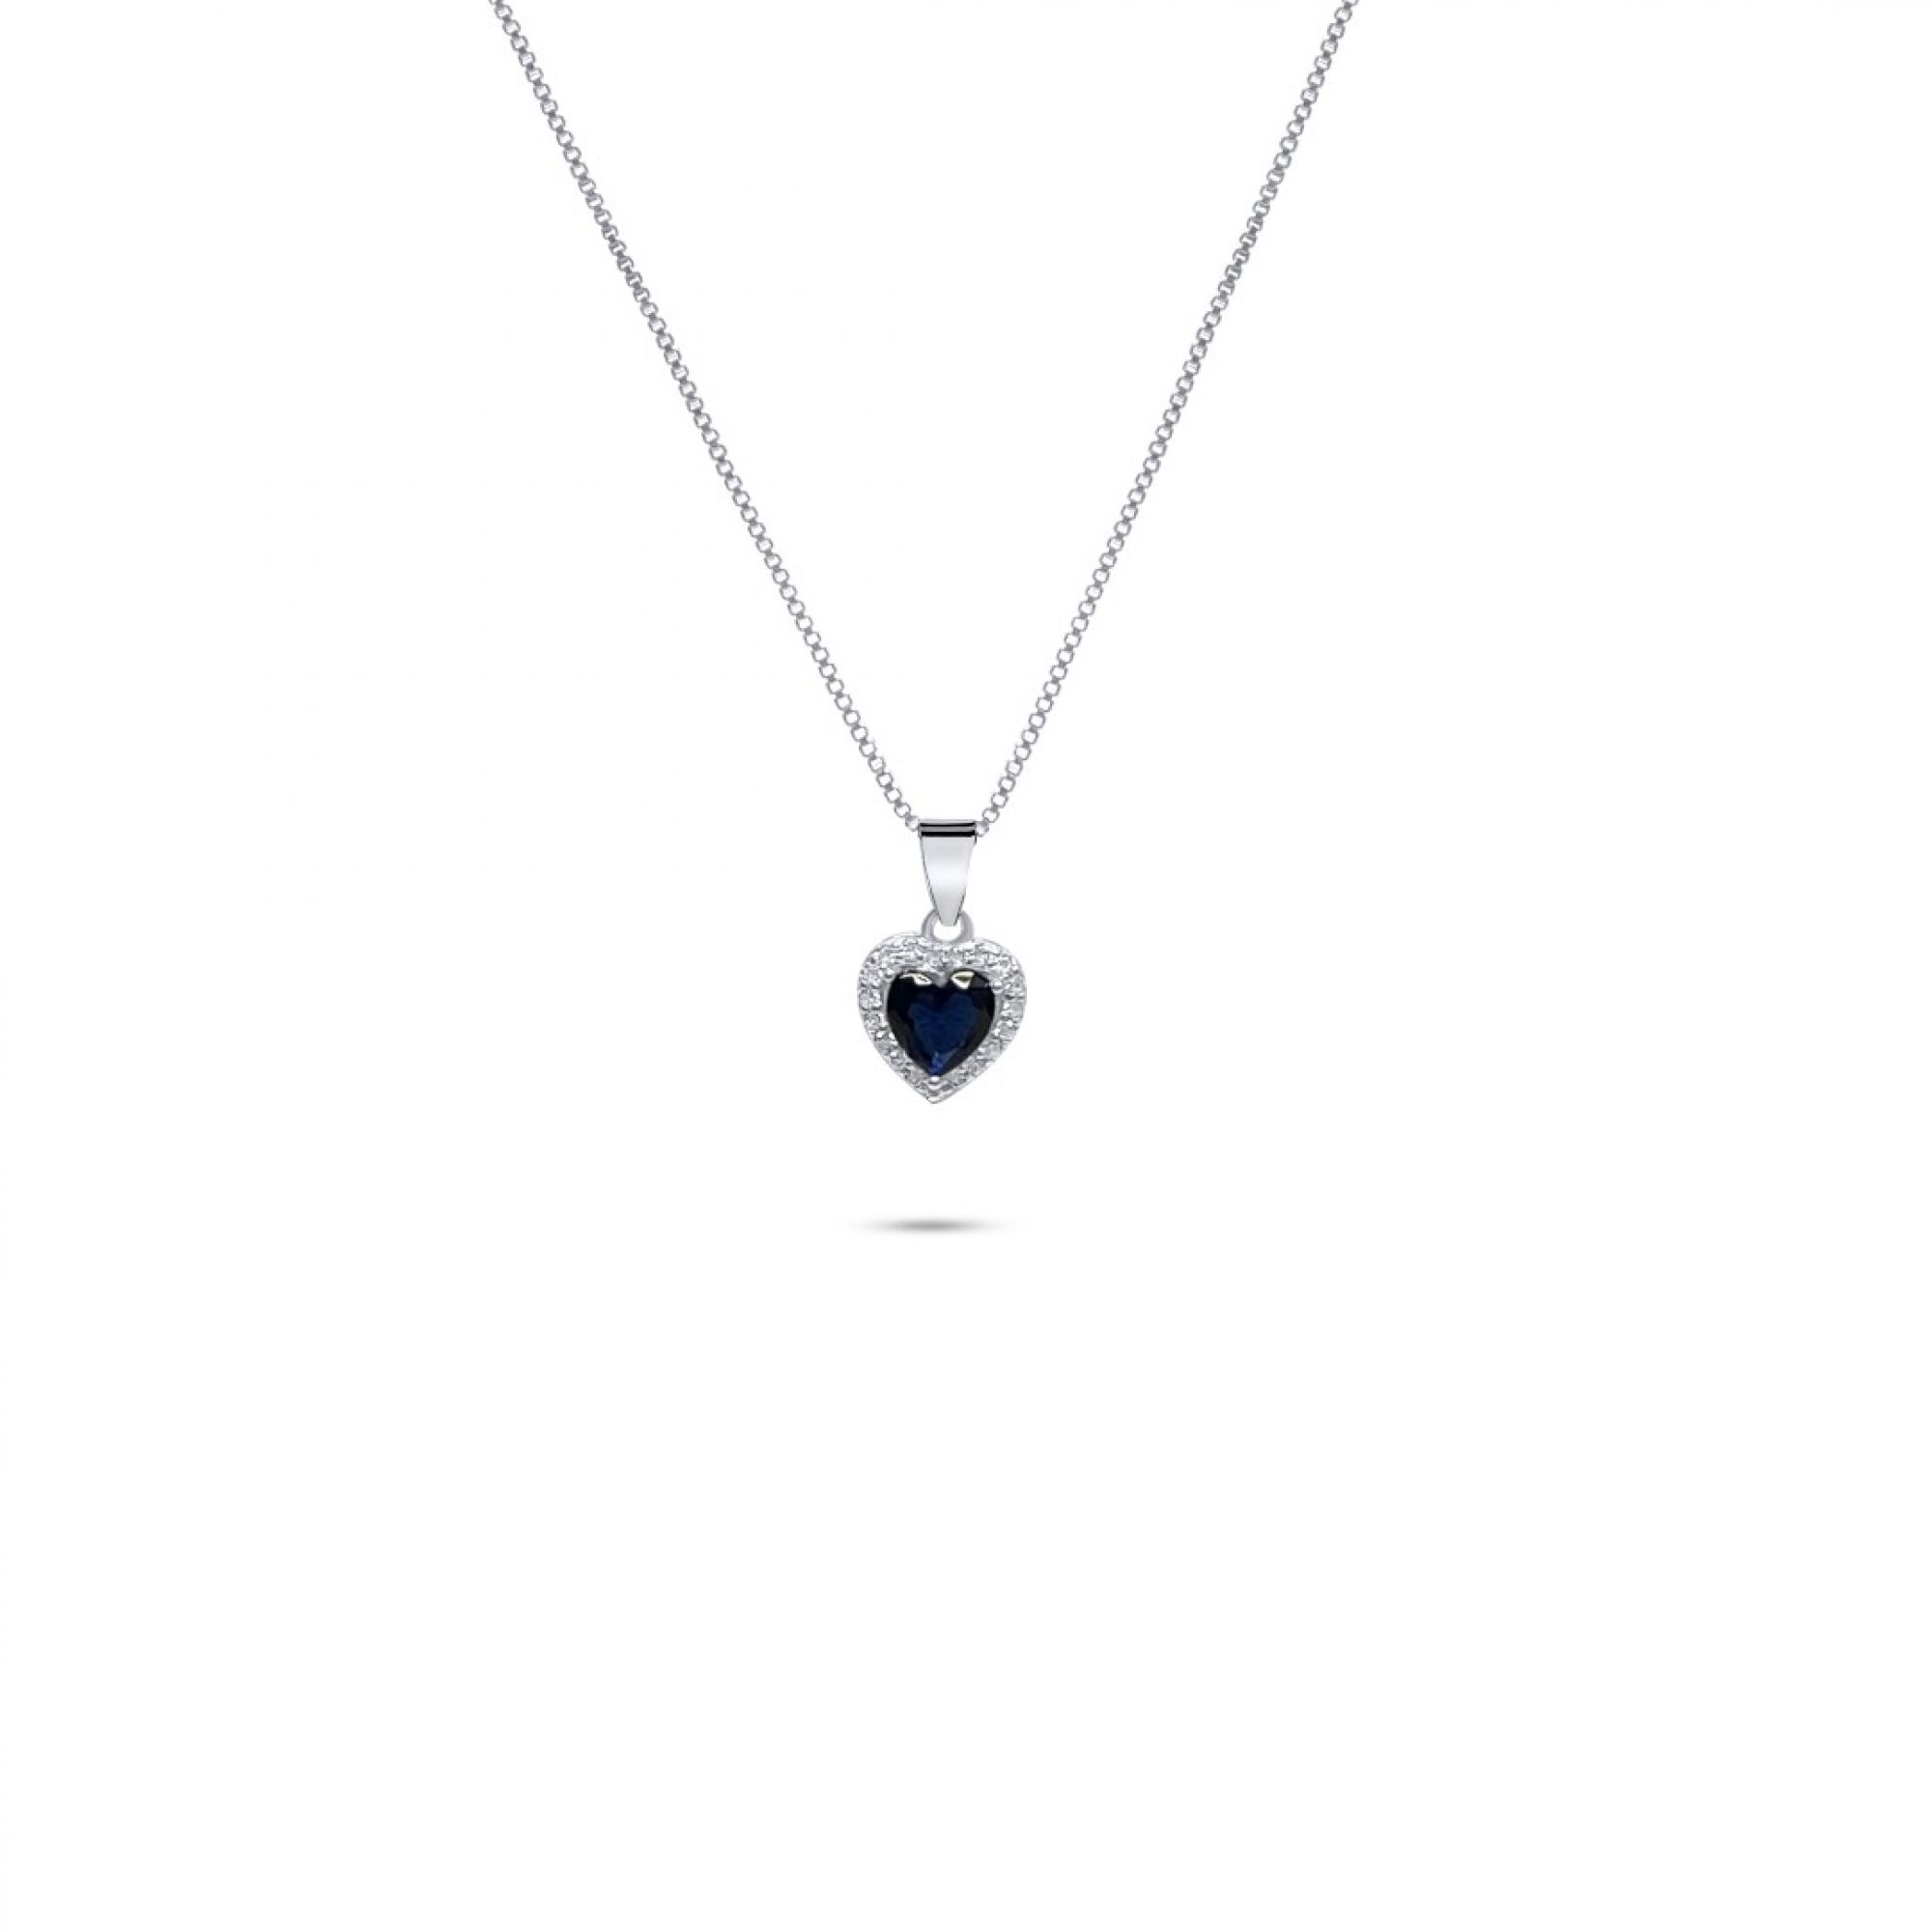 Heart necklace with sapphire and zircon stones